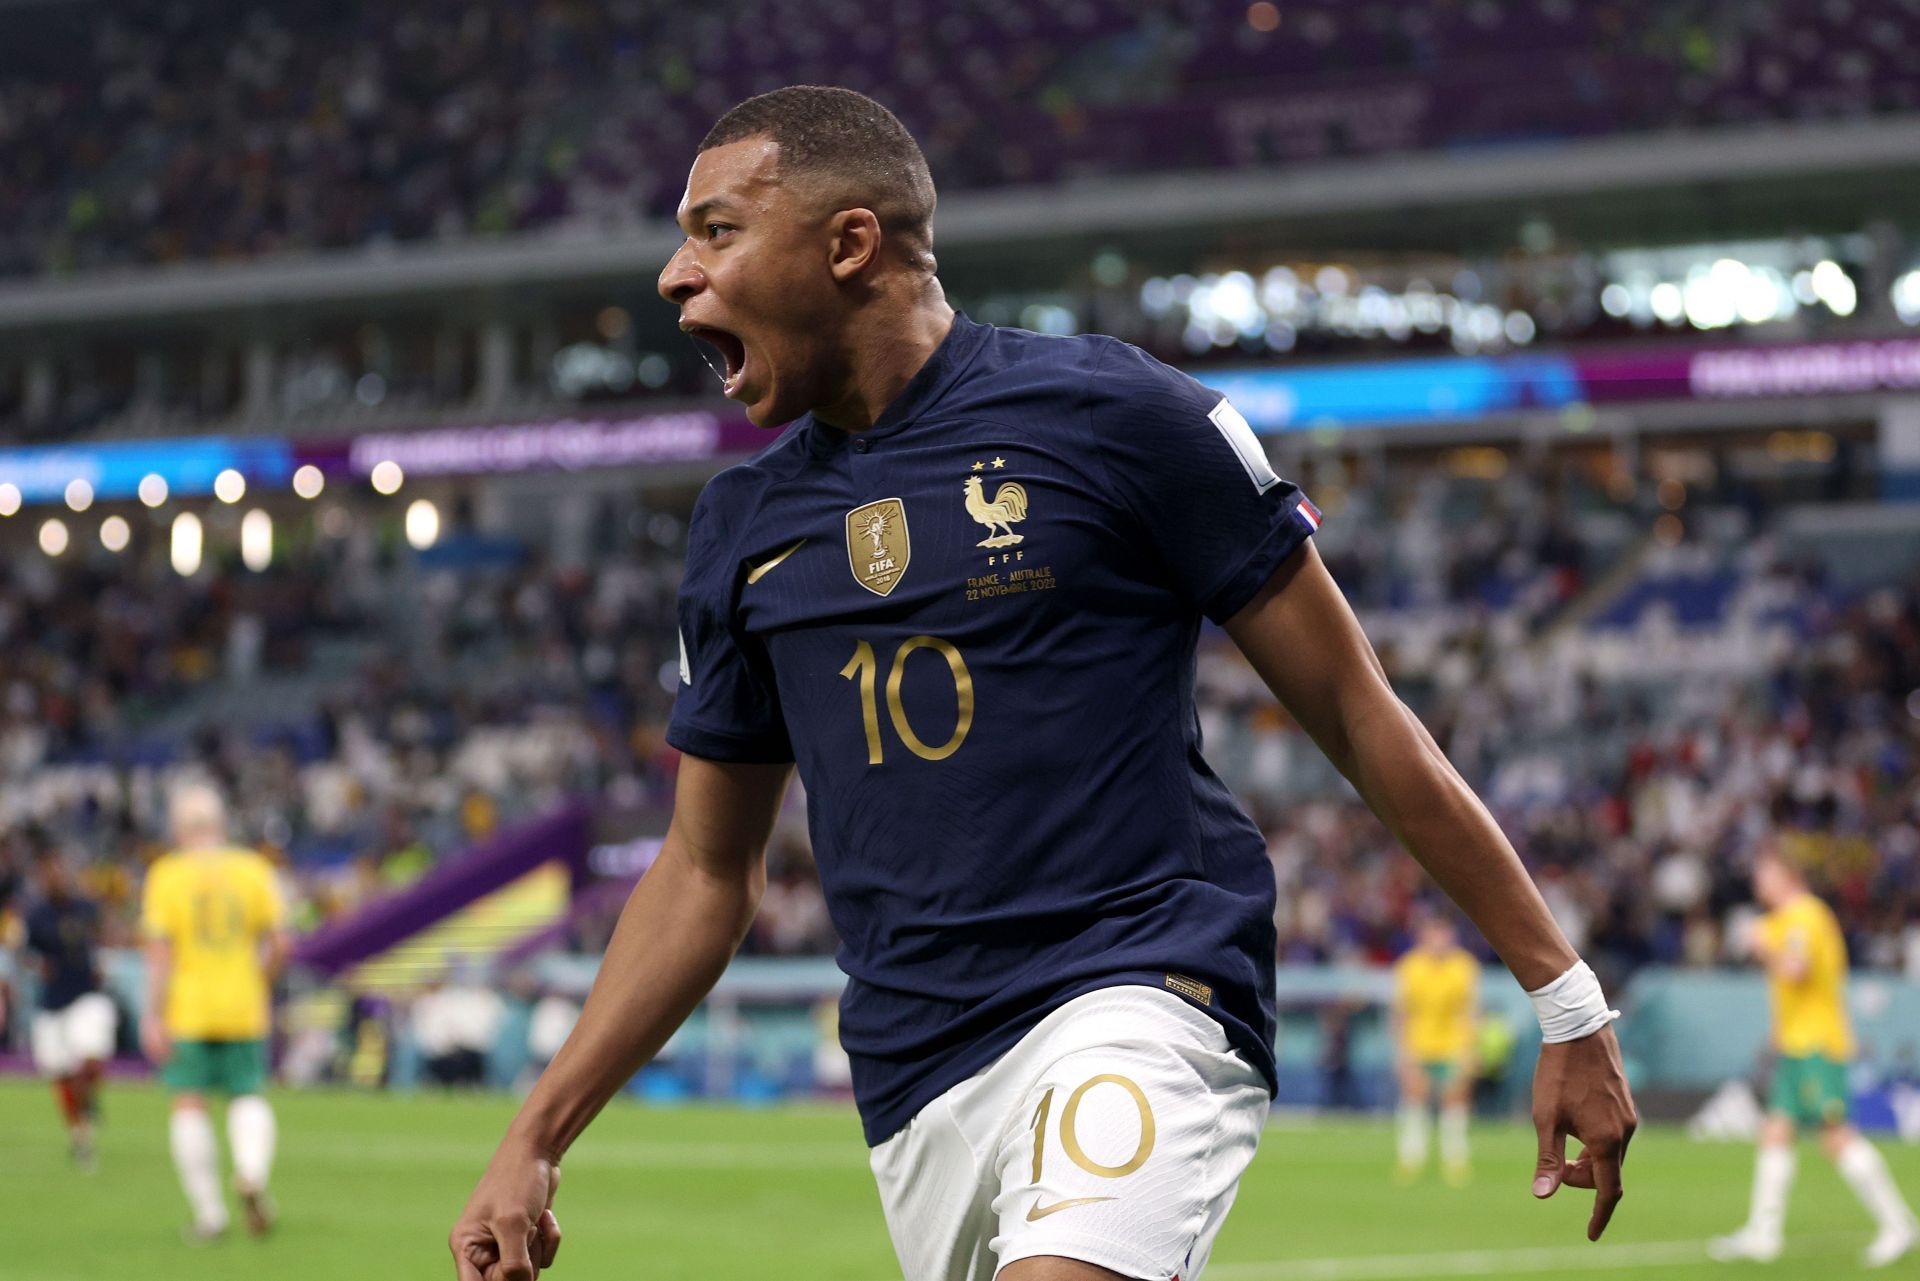 Mbappe has arrived in Qatar